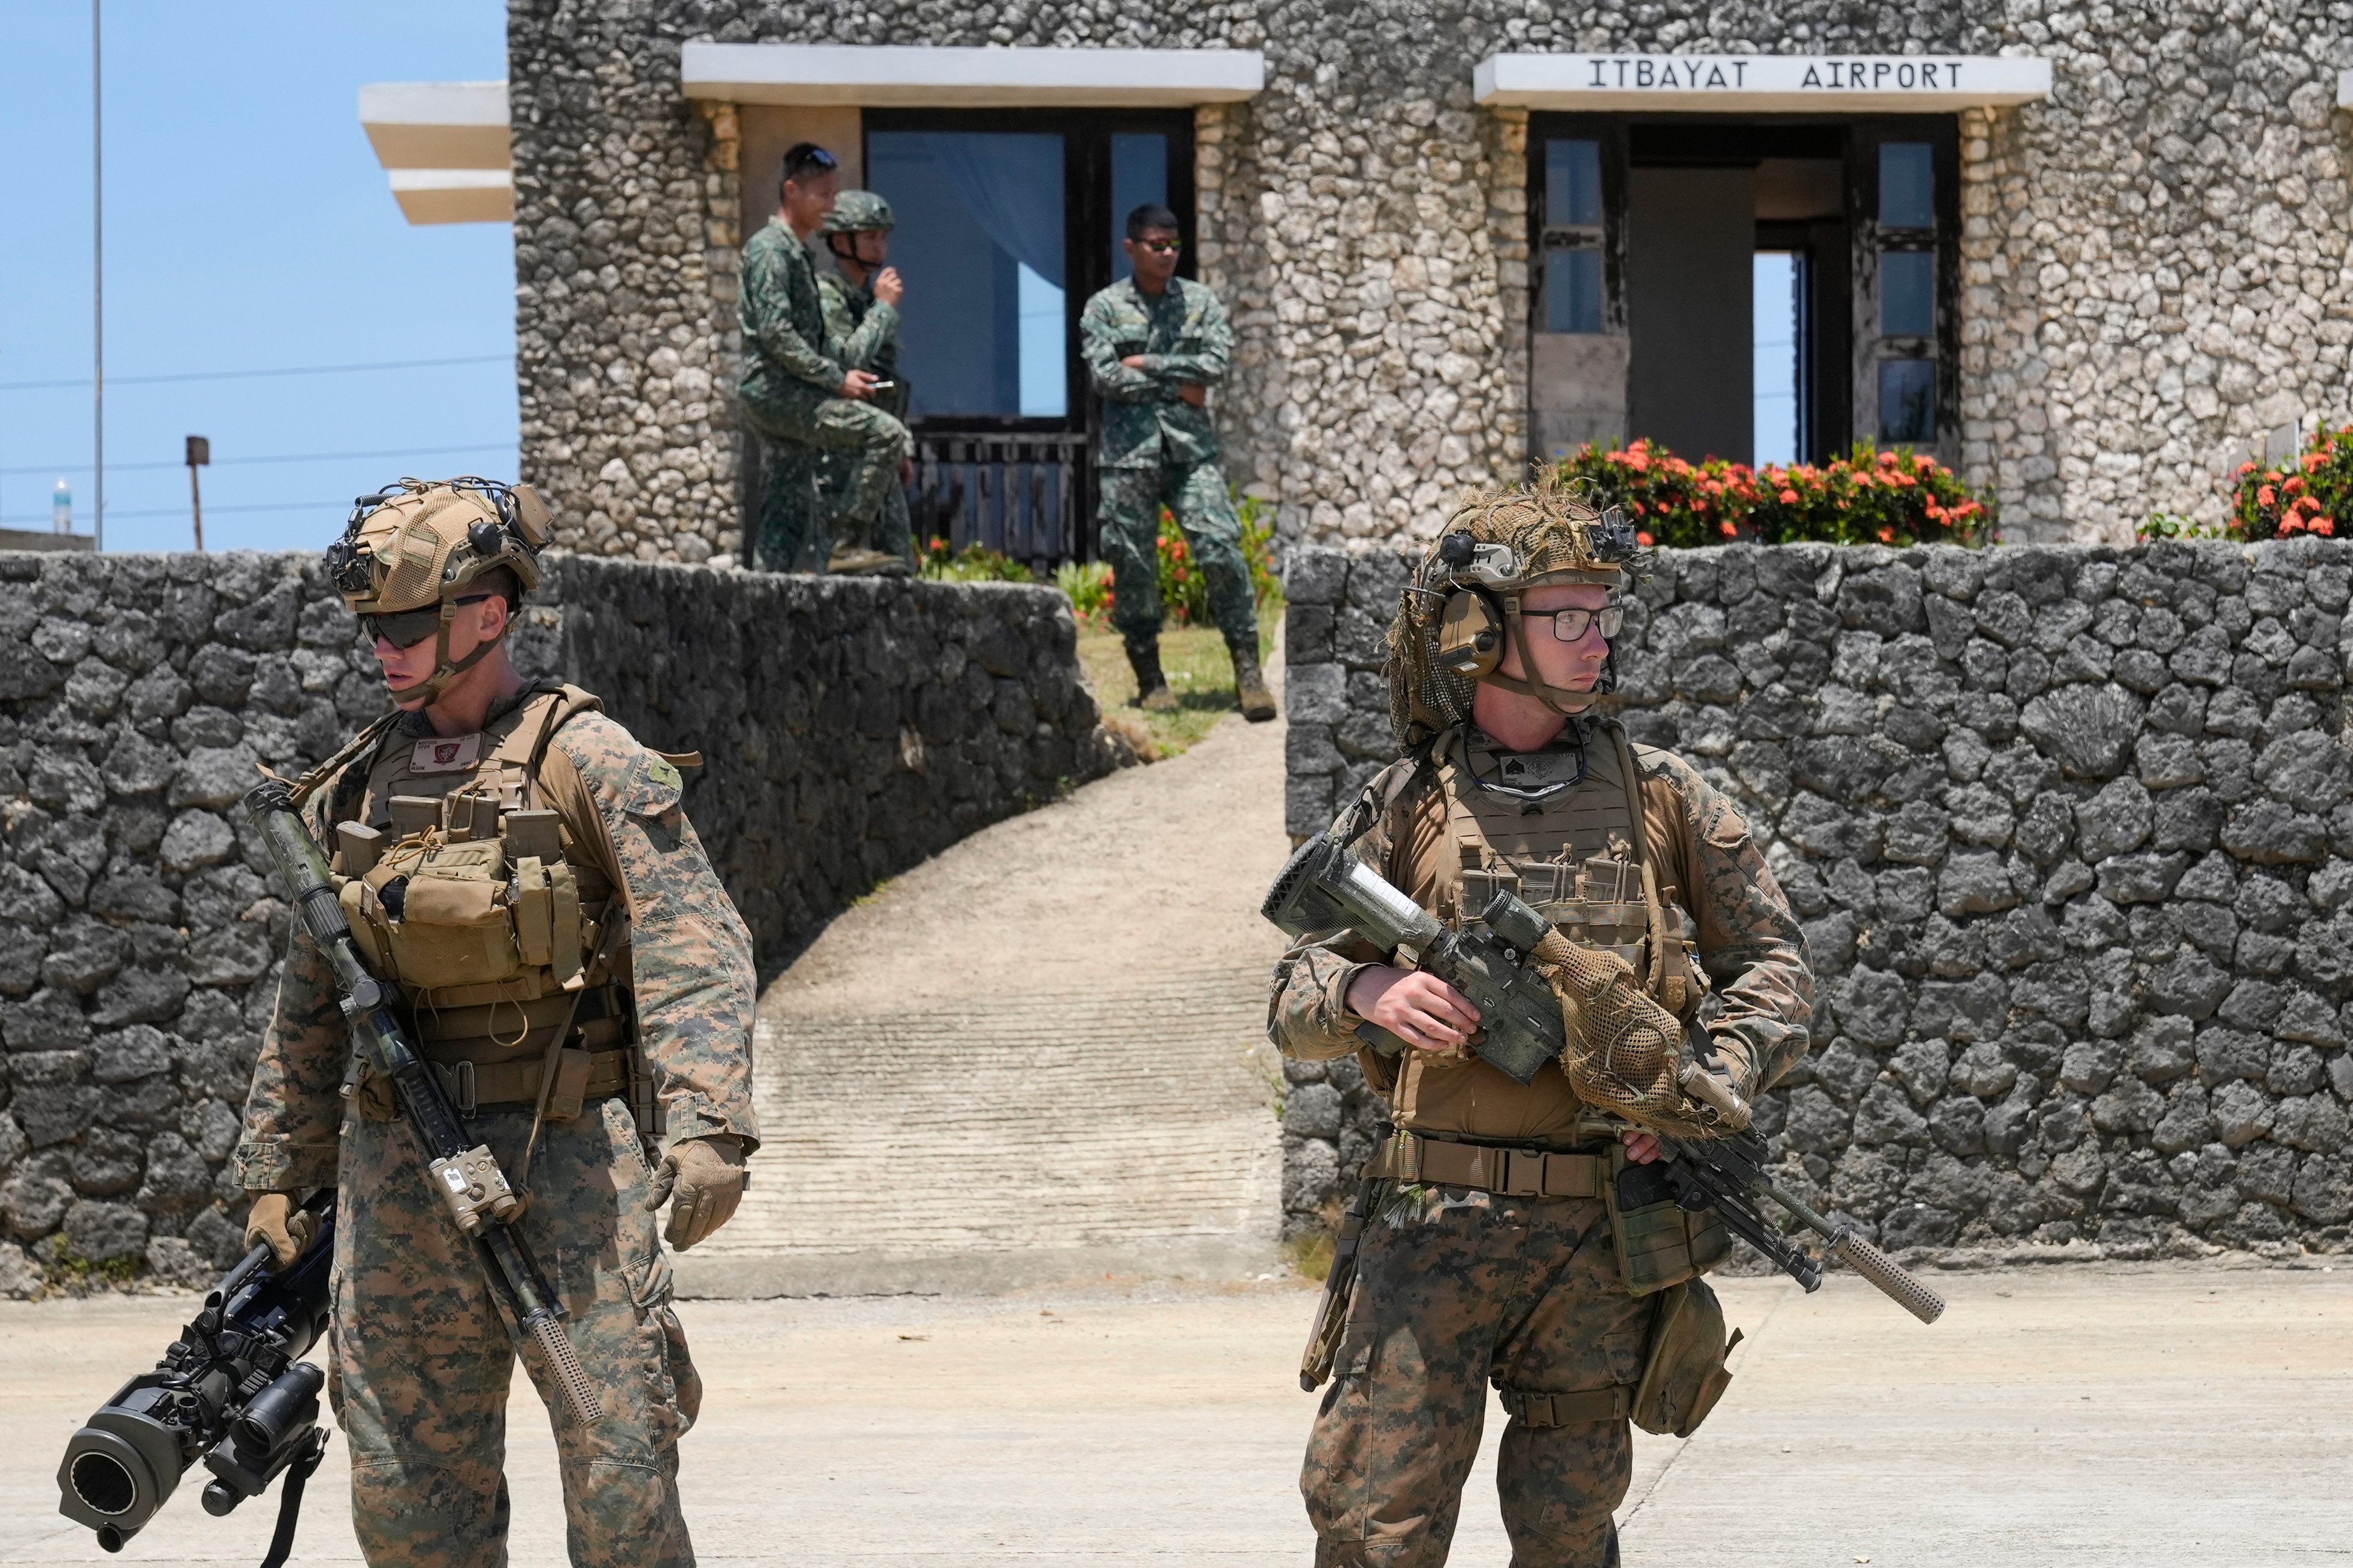 US troops secure an airport in the Philippines’ northernmost town of Itbayat, Batanes province, on Monday during the ongoing Balikatan joint military exercises. Photo: AP